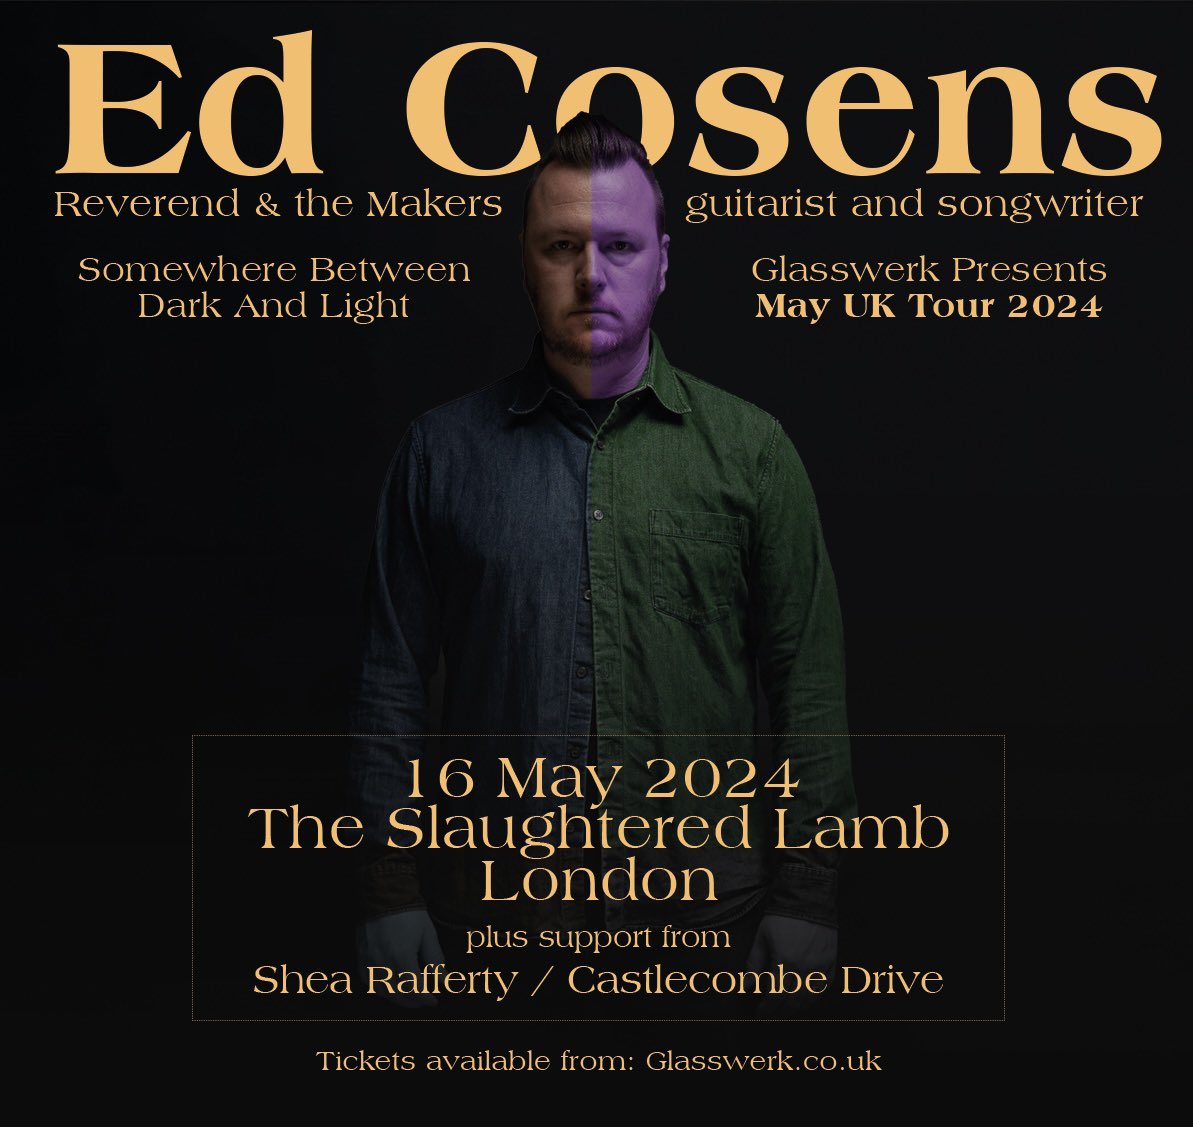 We’re extremely excited to announce that we’ll be supporting the legendary @edcosens of @reverend_makers on the London leg of his solo UK tour at the iconic @theslaughteredlambpub on the 16th of May! This is a huge one for us so let’s all show these boys what we can do!